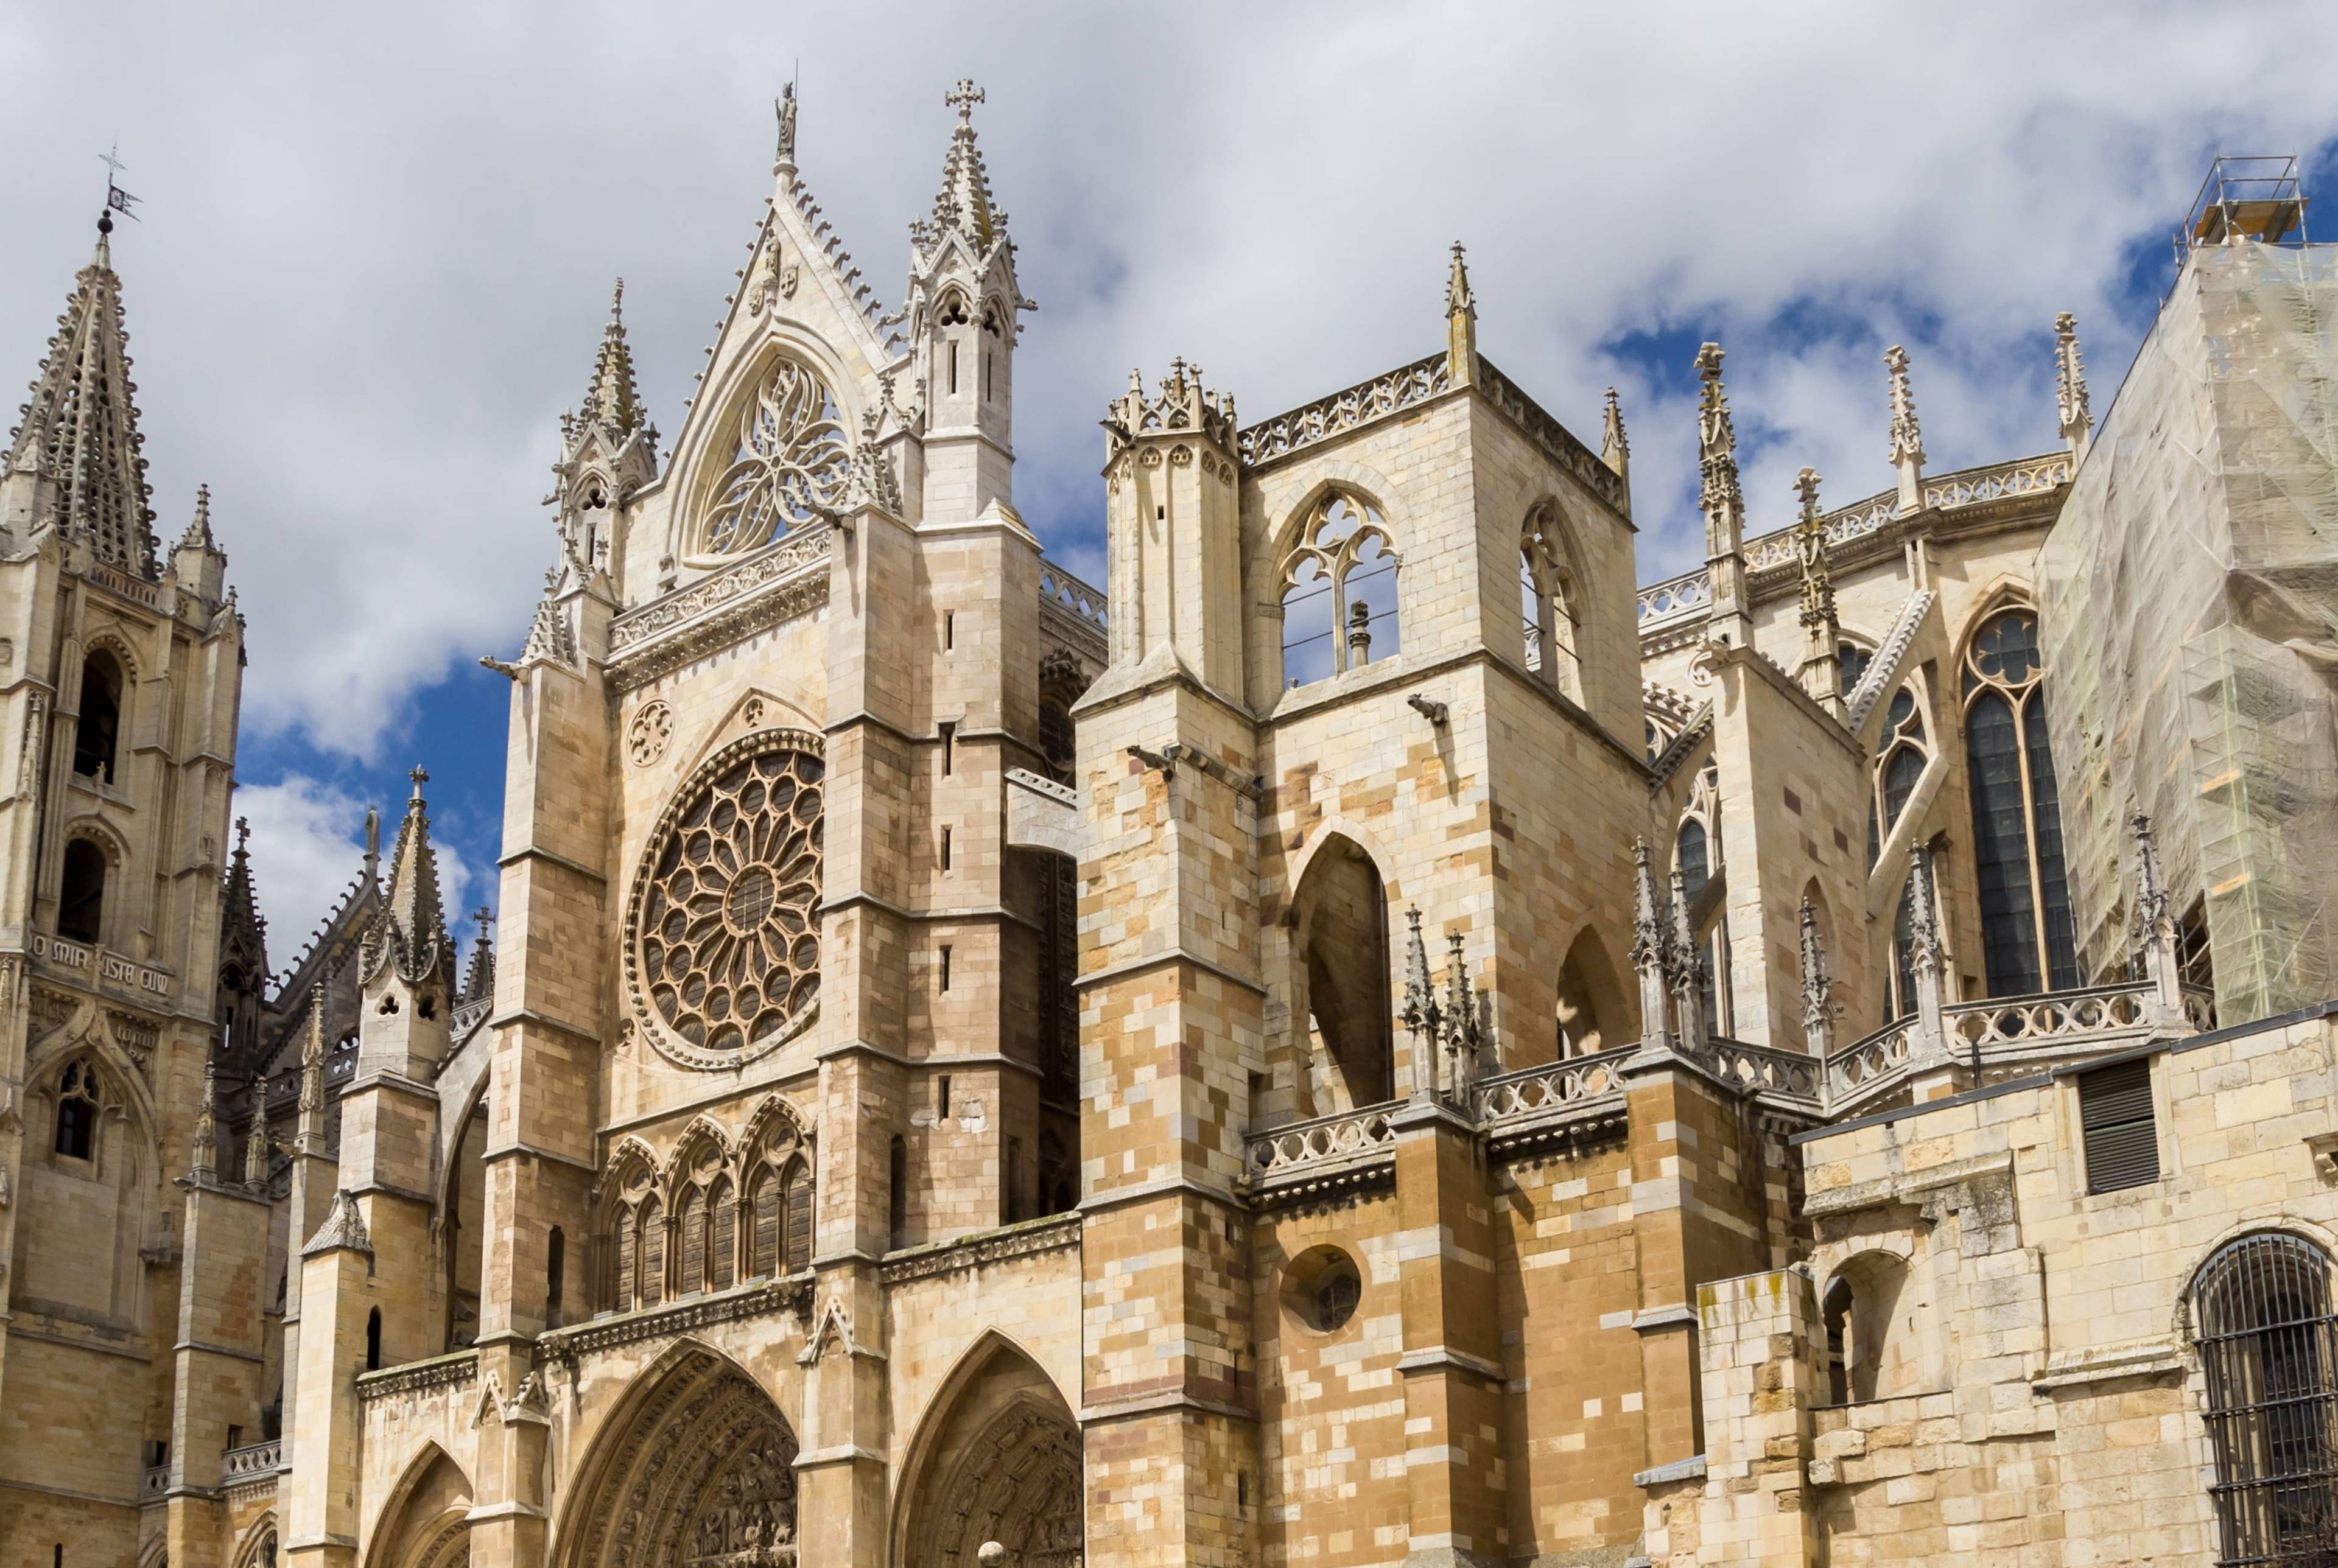 2-Day Tour of the Most Magical Corners of the City of León